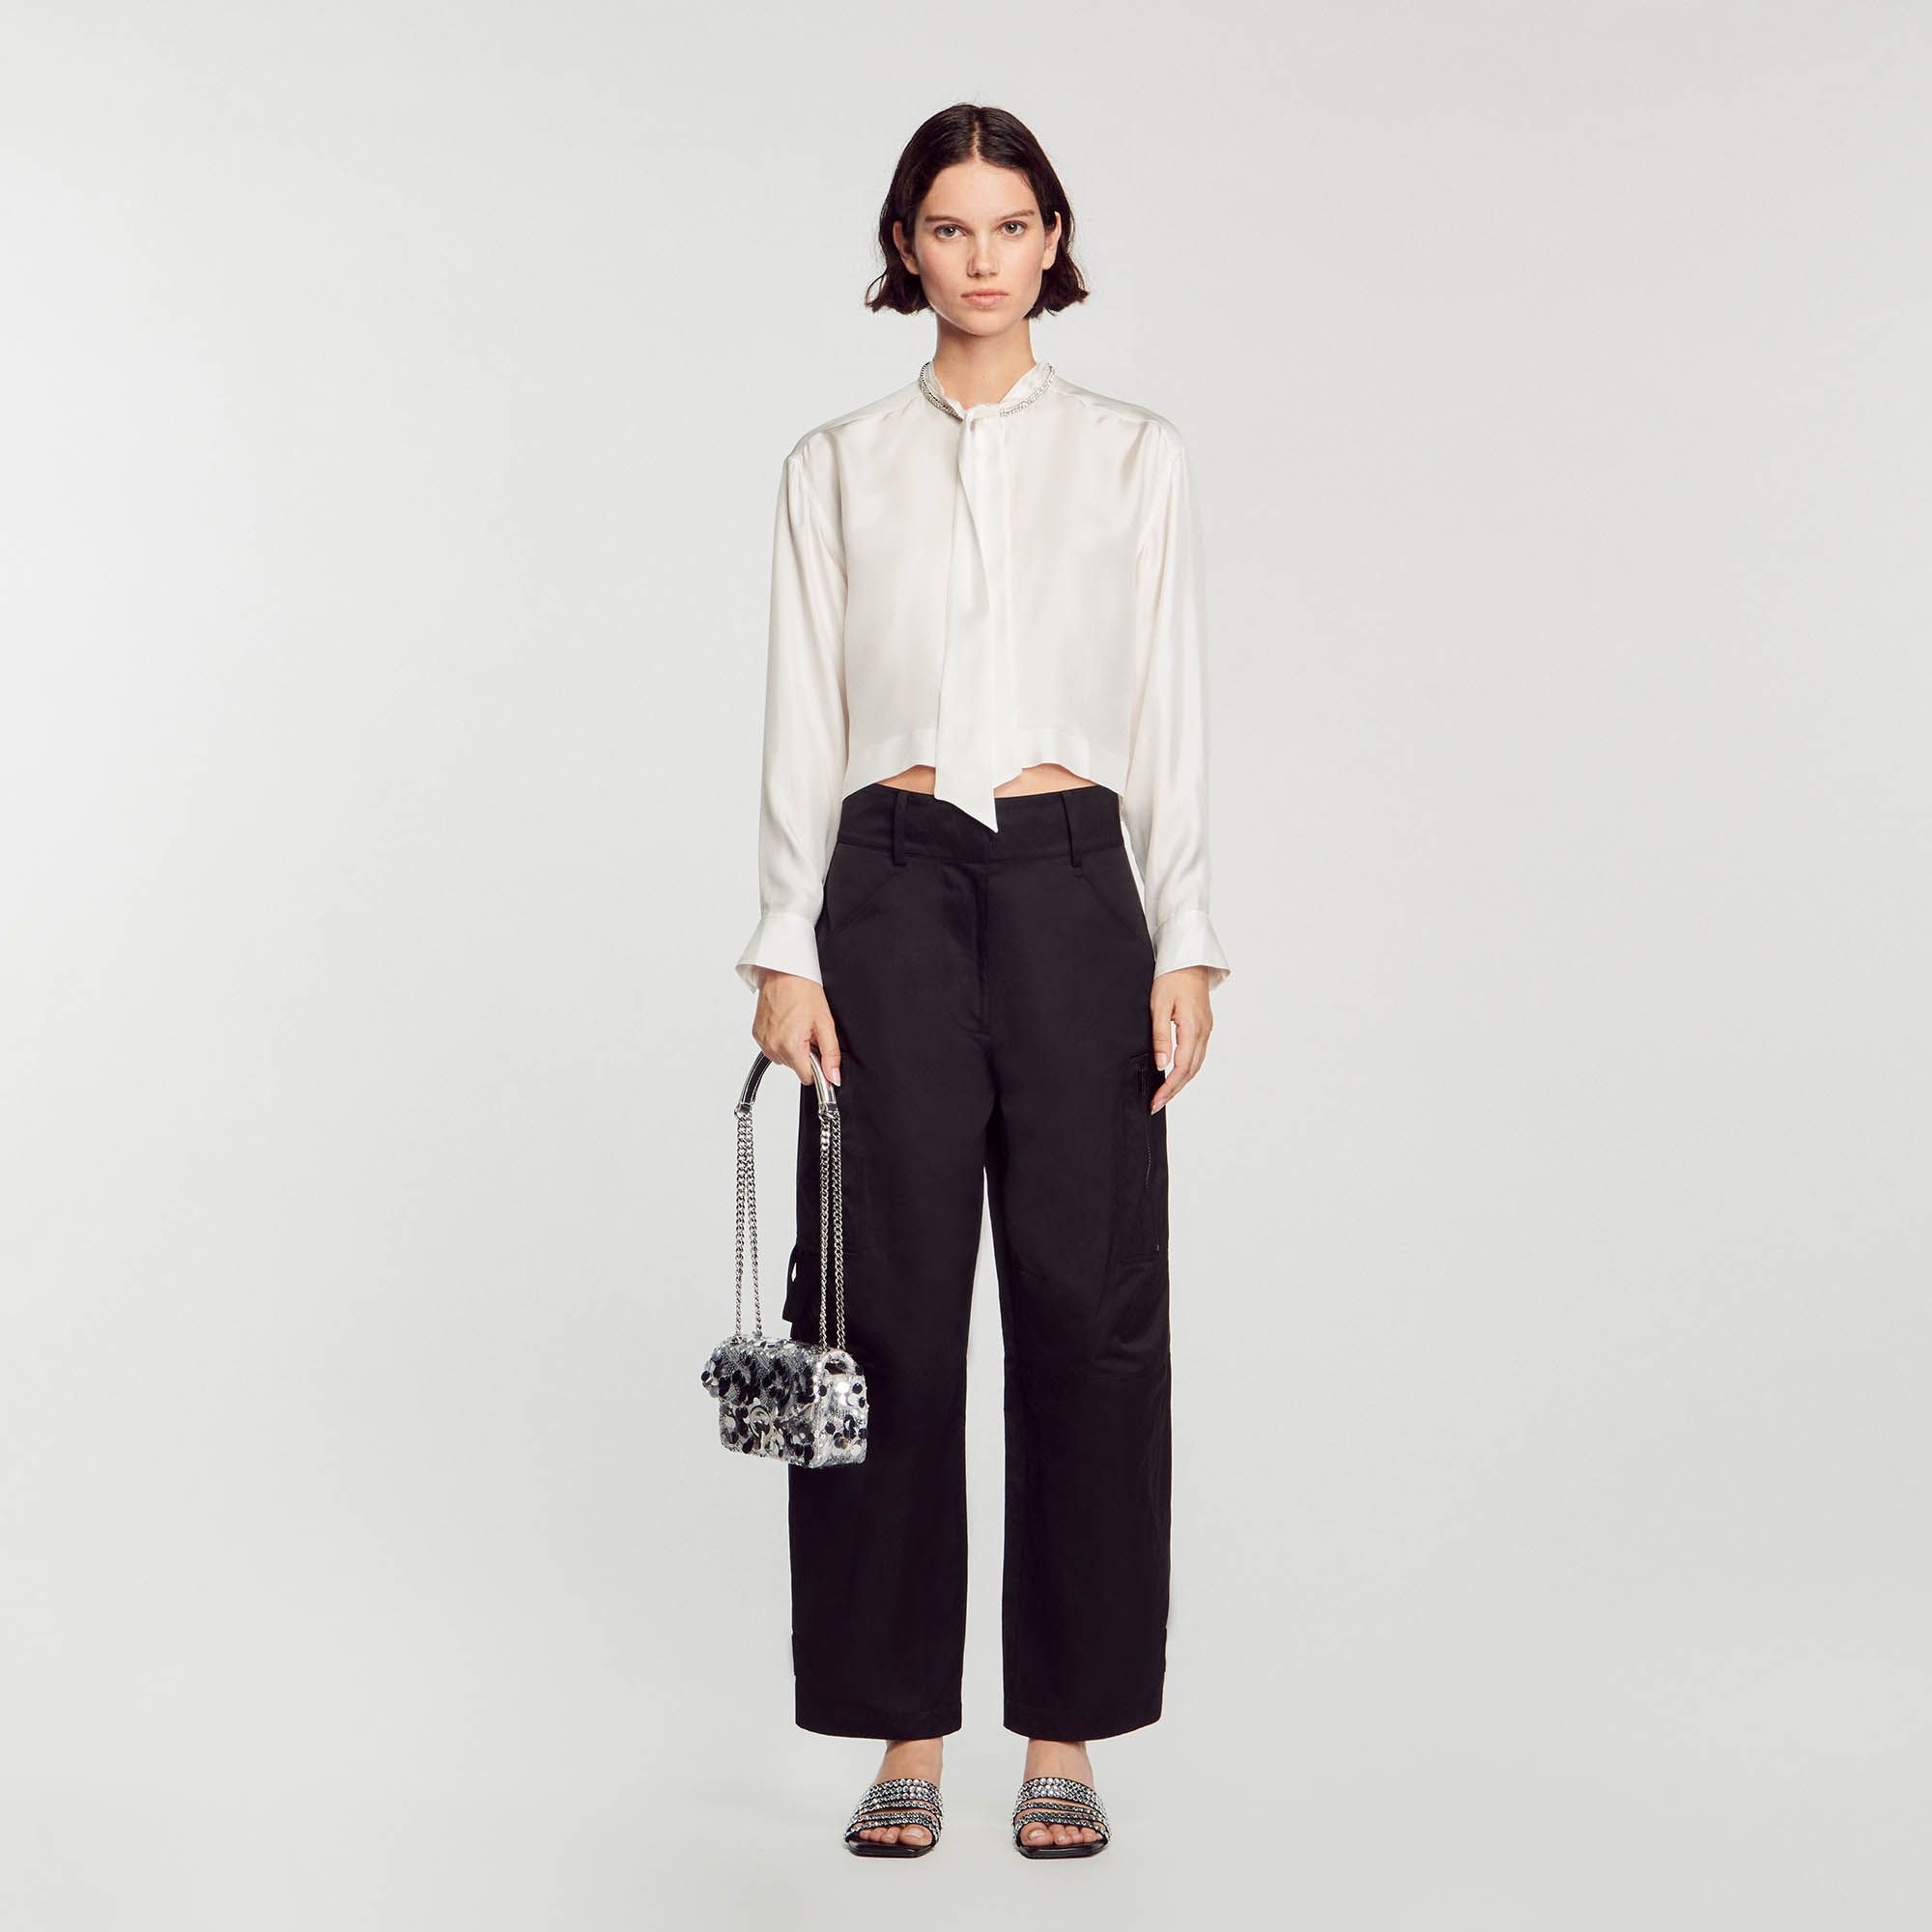 Sandro cotton Oversized cargo pants in shiny fabric with large zip-fastening flap side pockets and belt loops